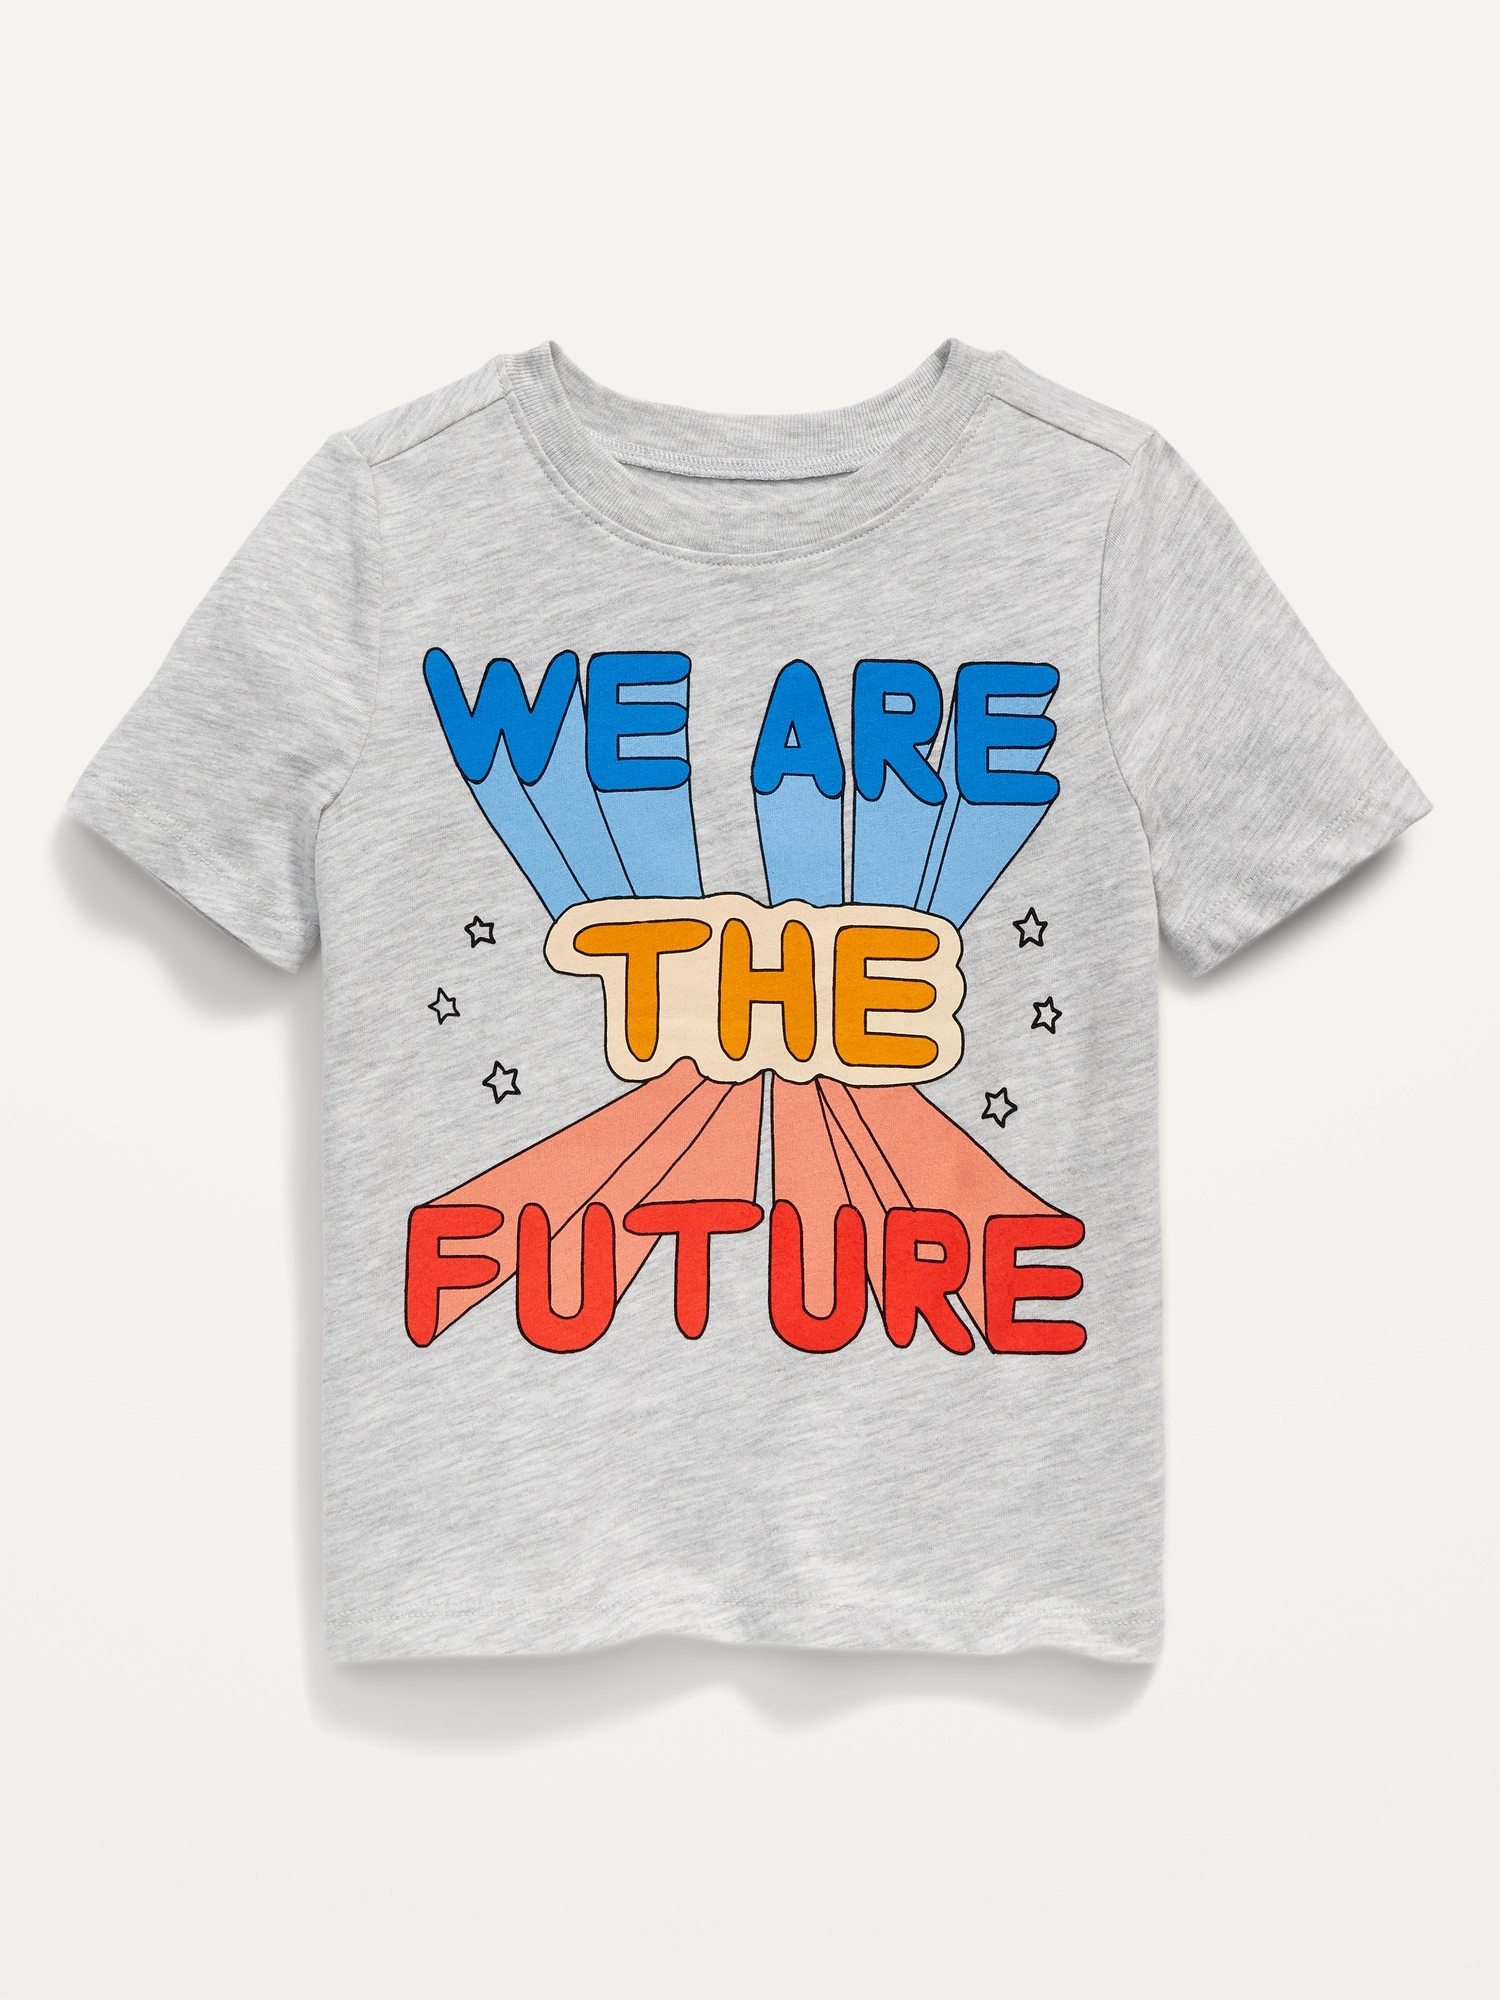 Unisex Short-Sleeve Graphic Tee for Toddler 